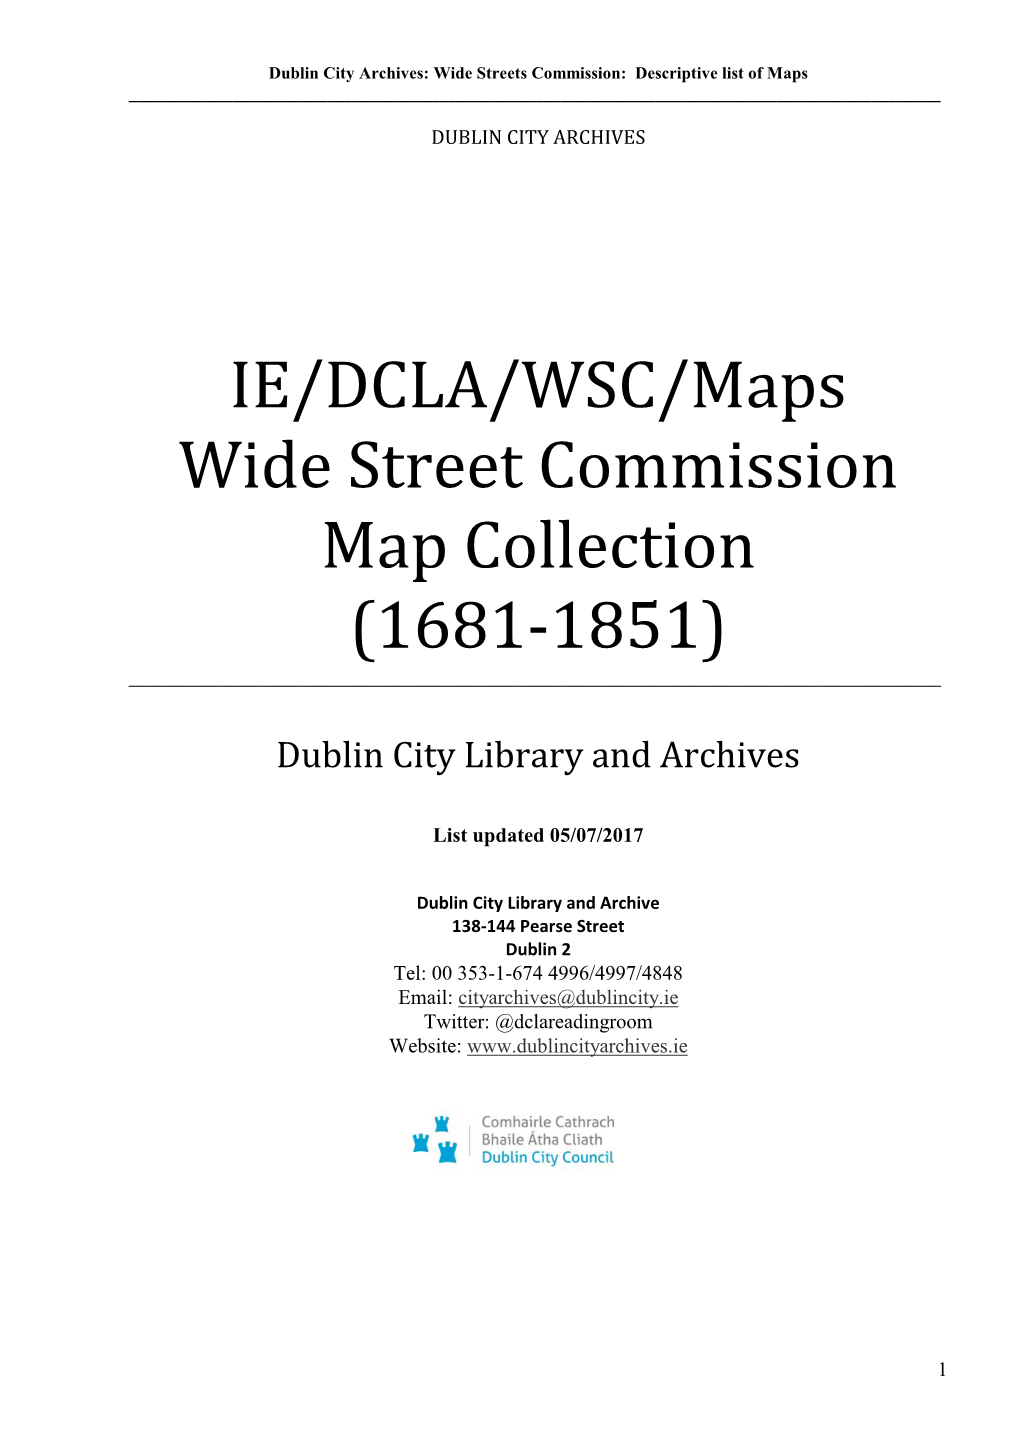 Wide Street Commission Map Collection (1681-1851) ______